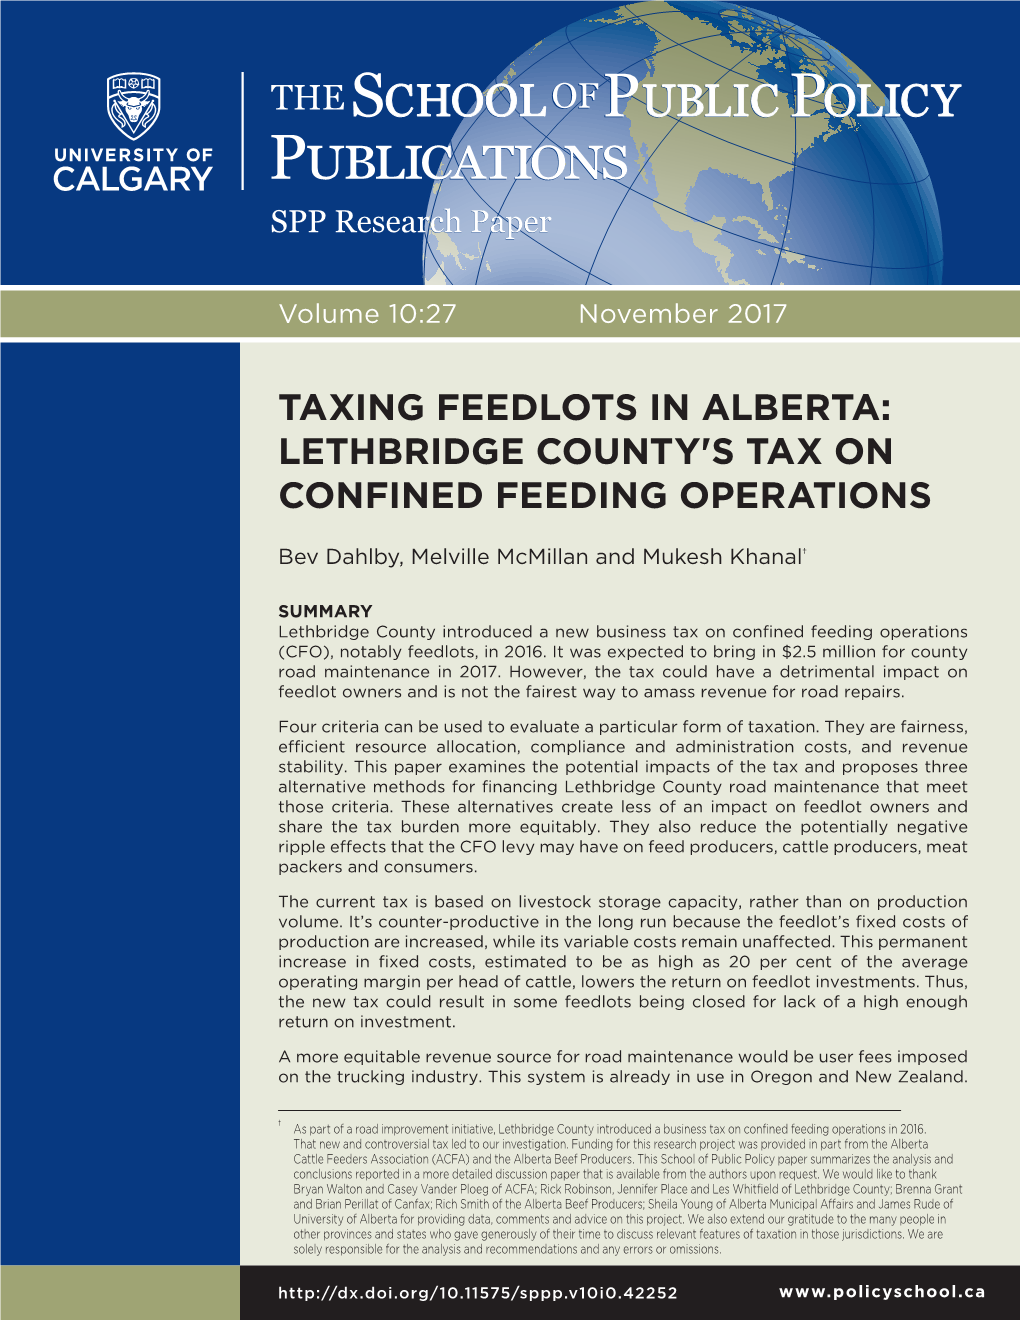 Lethbridge County's Tax on Confined Feeding Operations